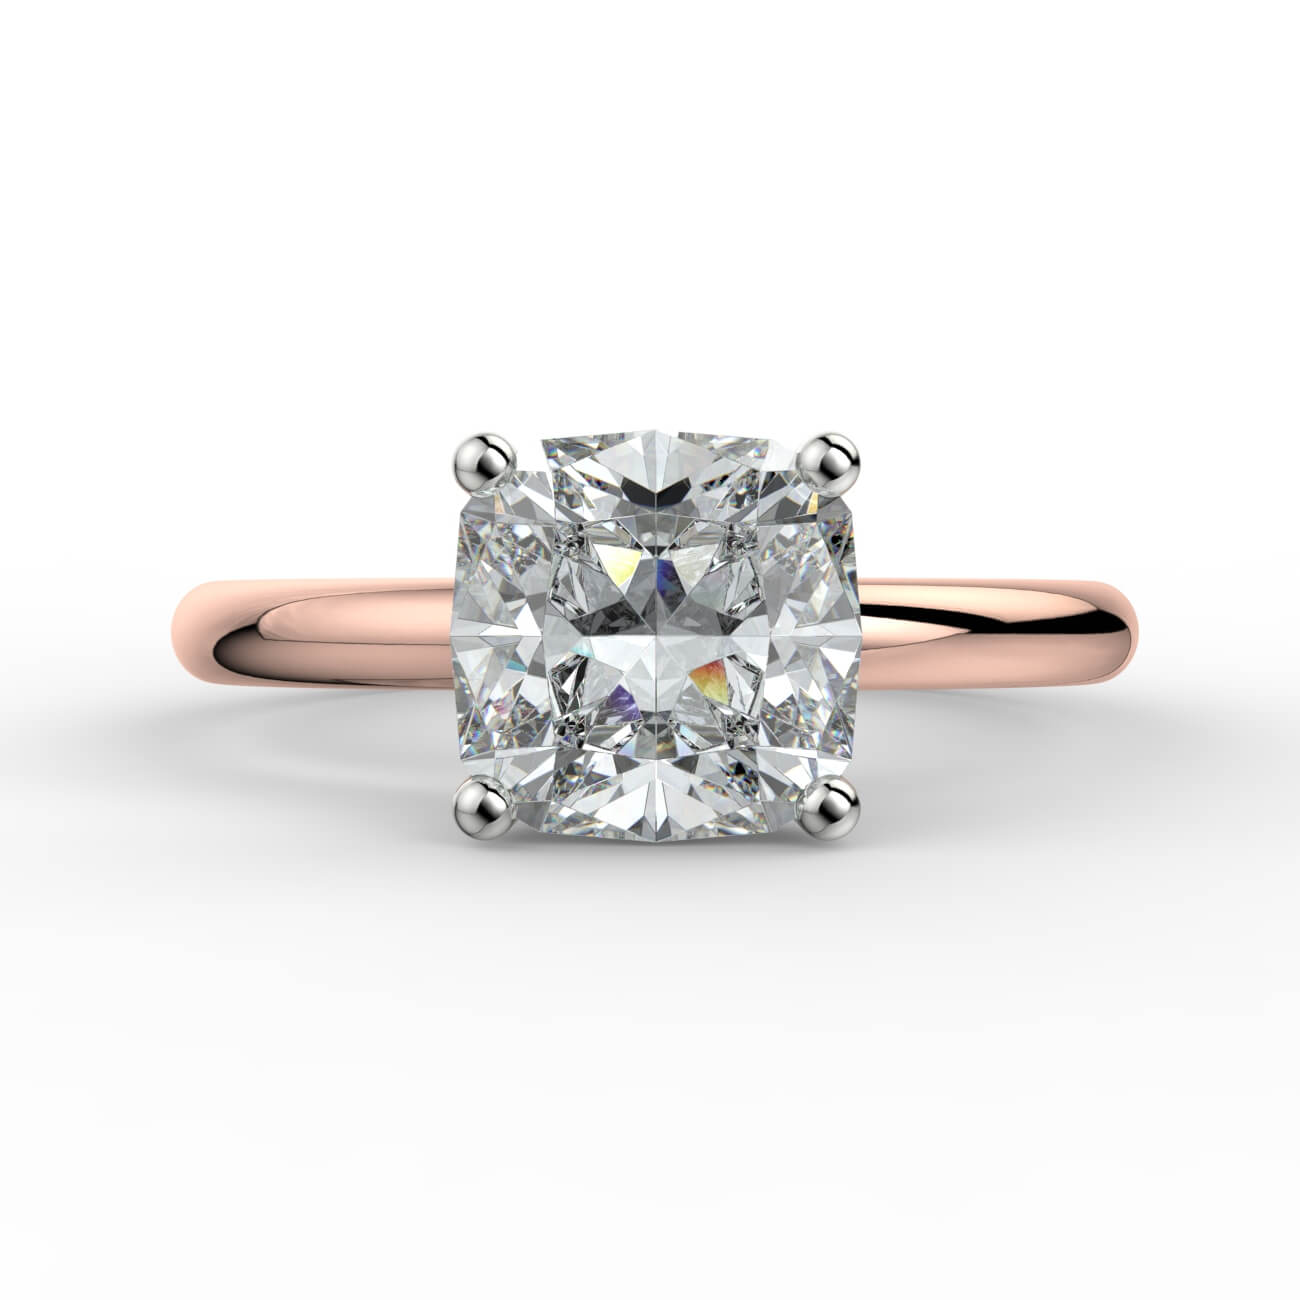 Solitaire cushion cut diamond engagement ring in rose and white gold – Australian Diamond Network